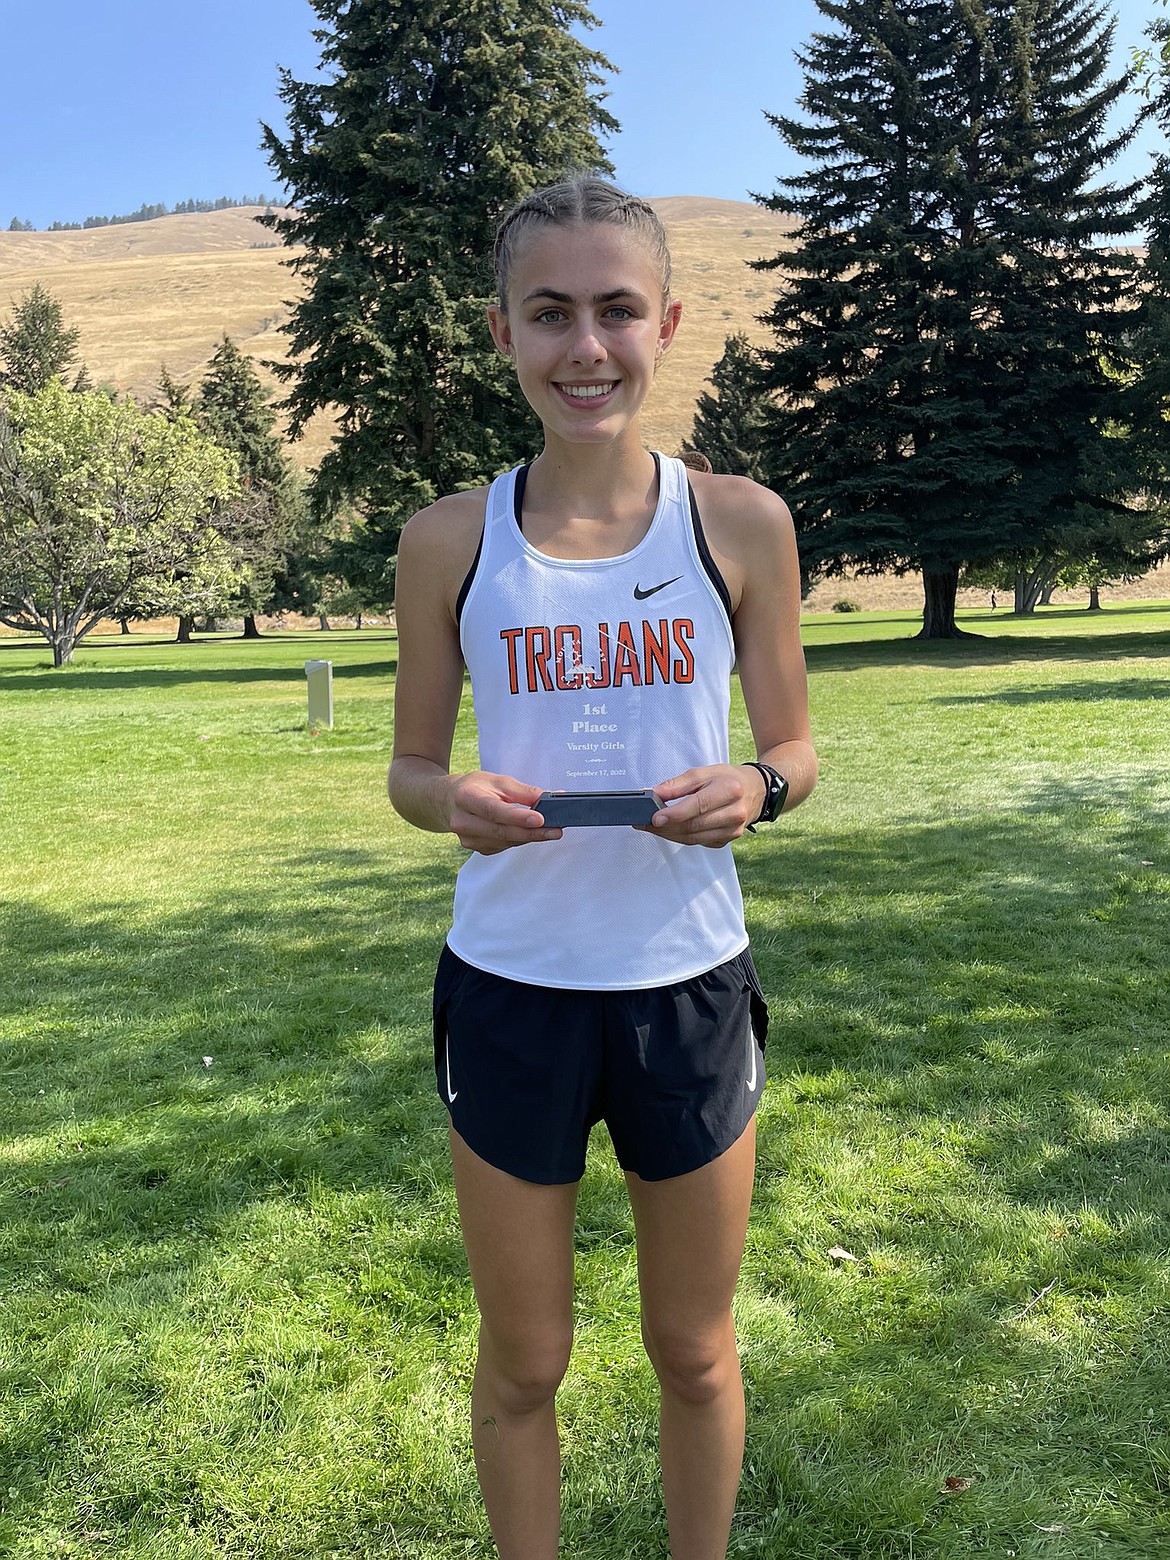 Courtesy POST FALLS ATHLETICS
Post Falls High senior Annastasia Peters won the girls race at the 31st annual Mountain West Classic at the University of Montana Golf Course on Saturday, finishing in 17 minutes, 47.76 seconds.